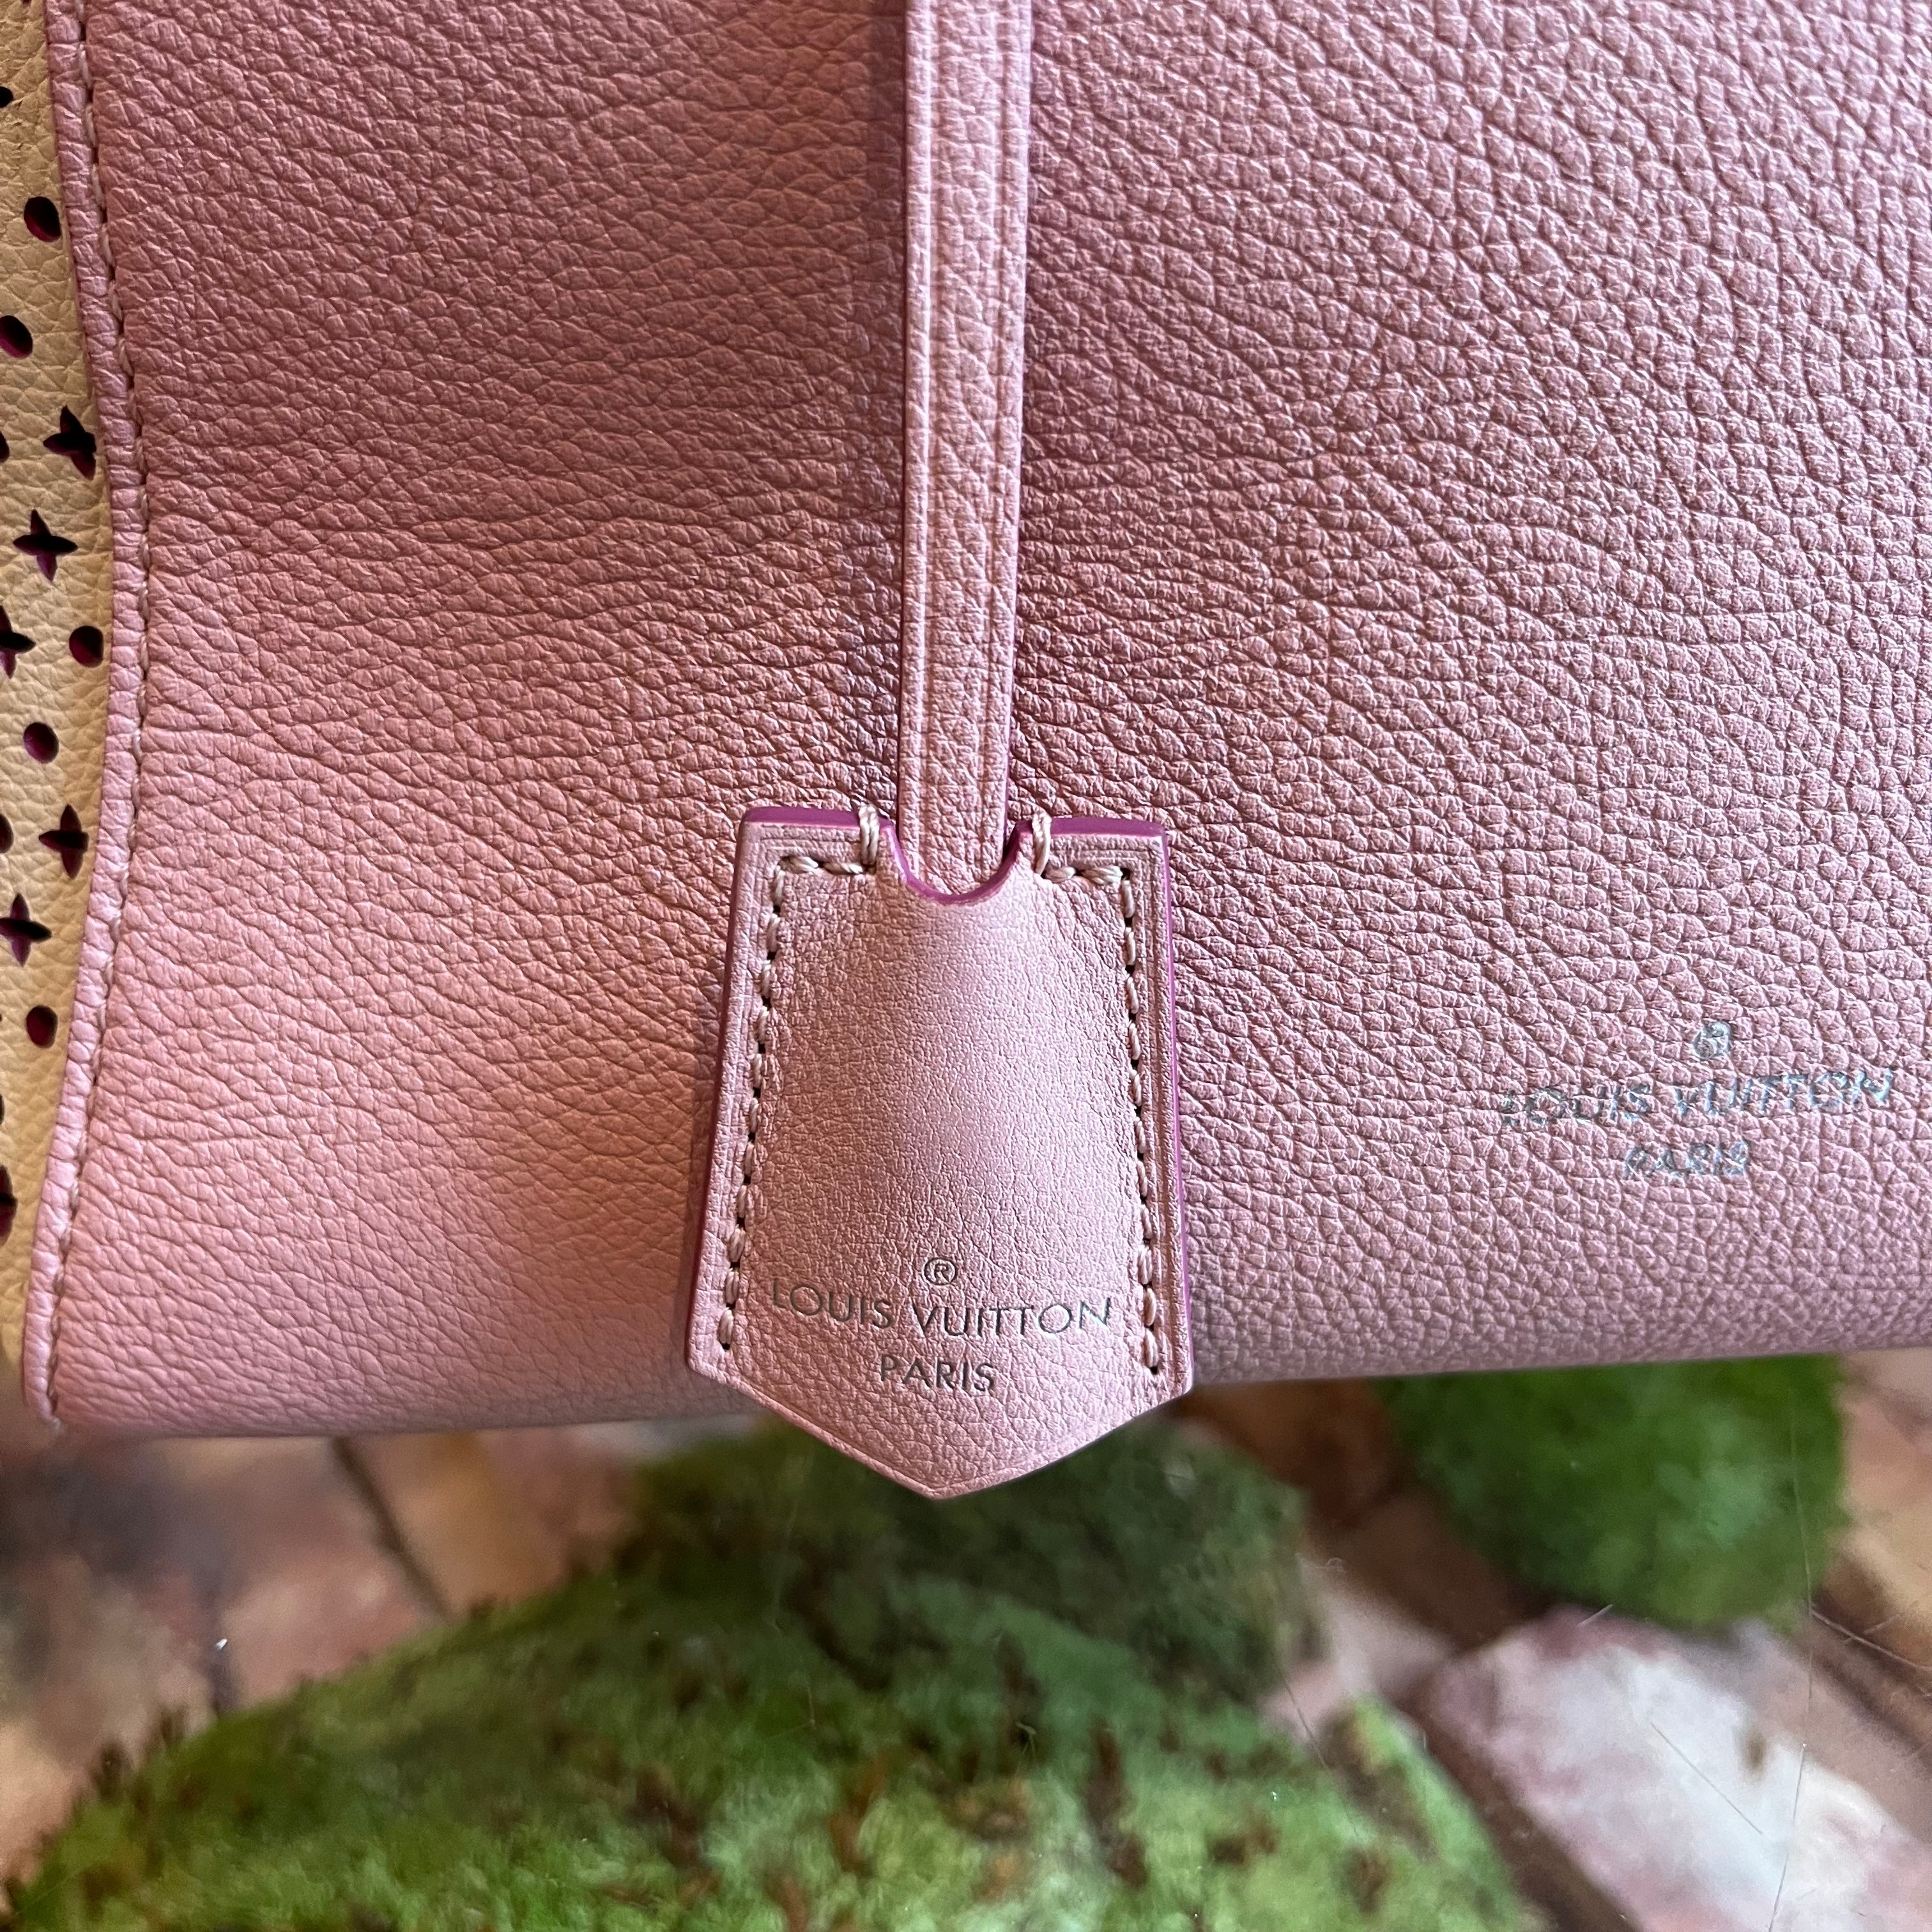 LOUIS VUITTON Pink Perforated Leather Monogram Flower LockMe Cabas